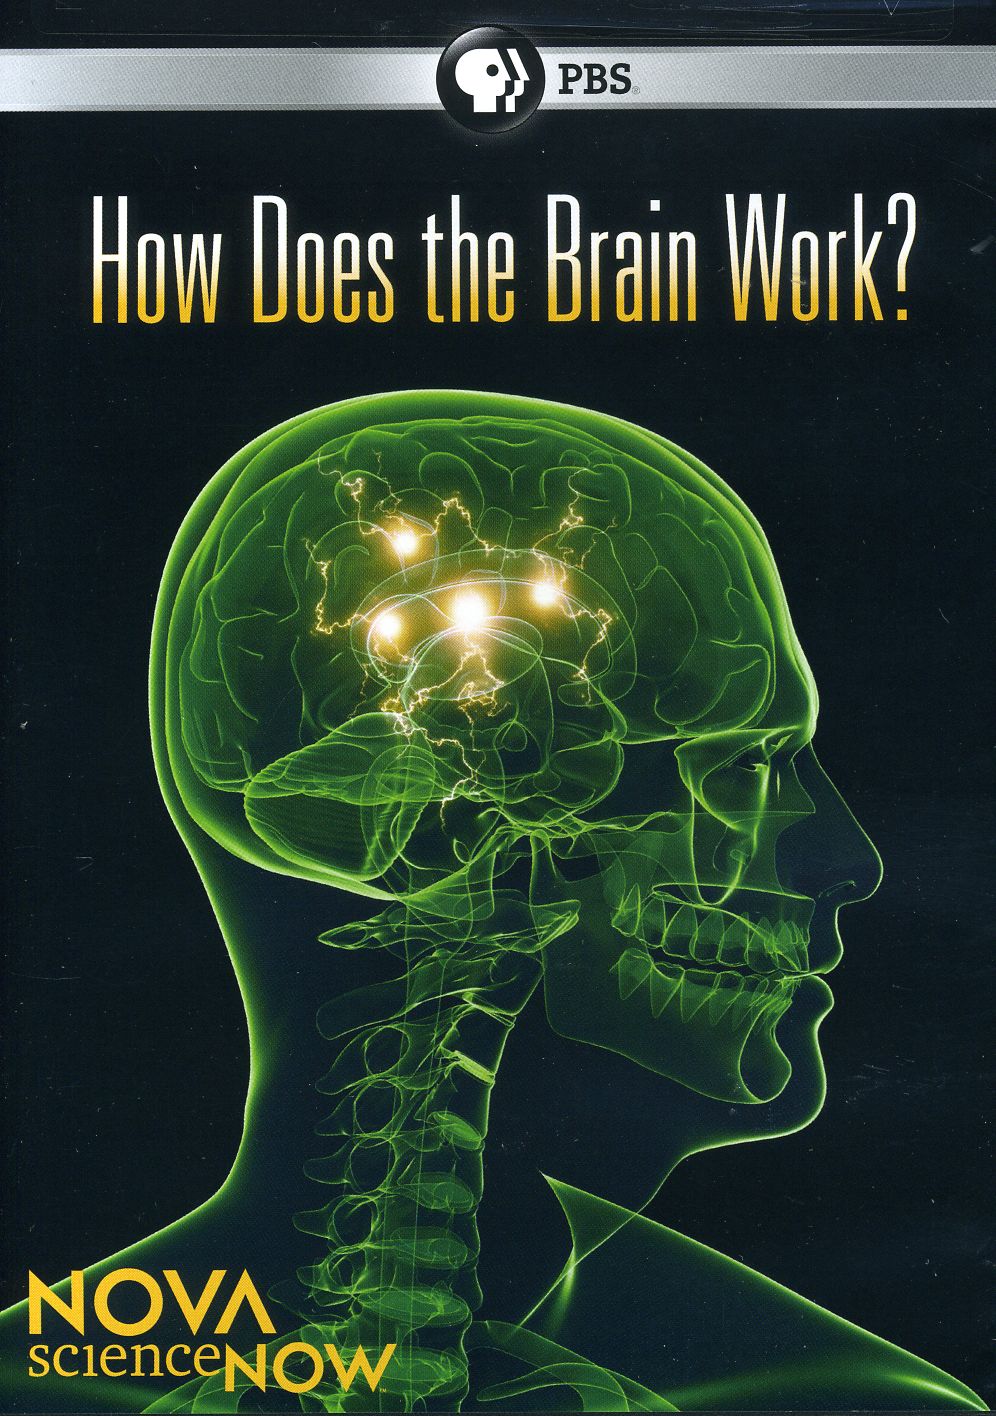 NOVA SCIENCE NOW: HOW DOES THE BRAIN WORK